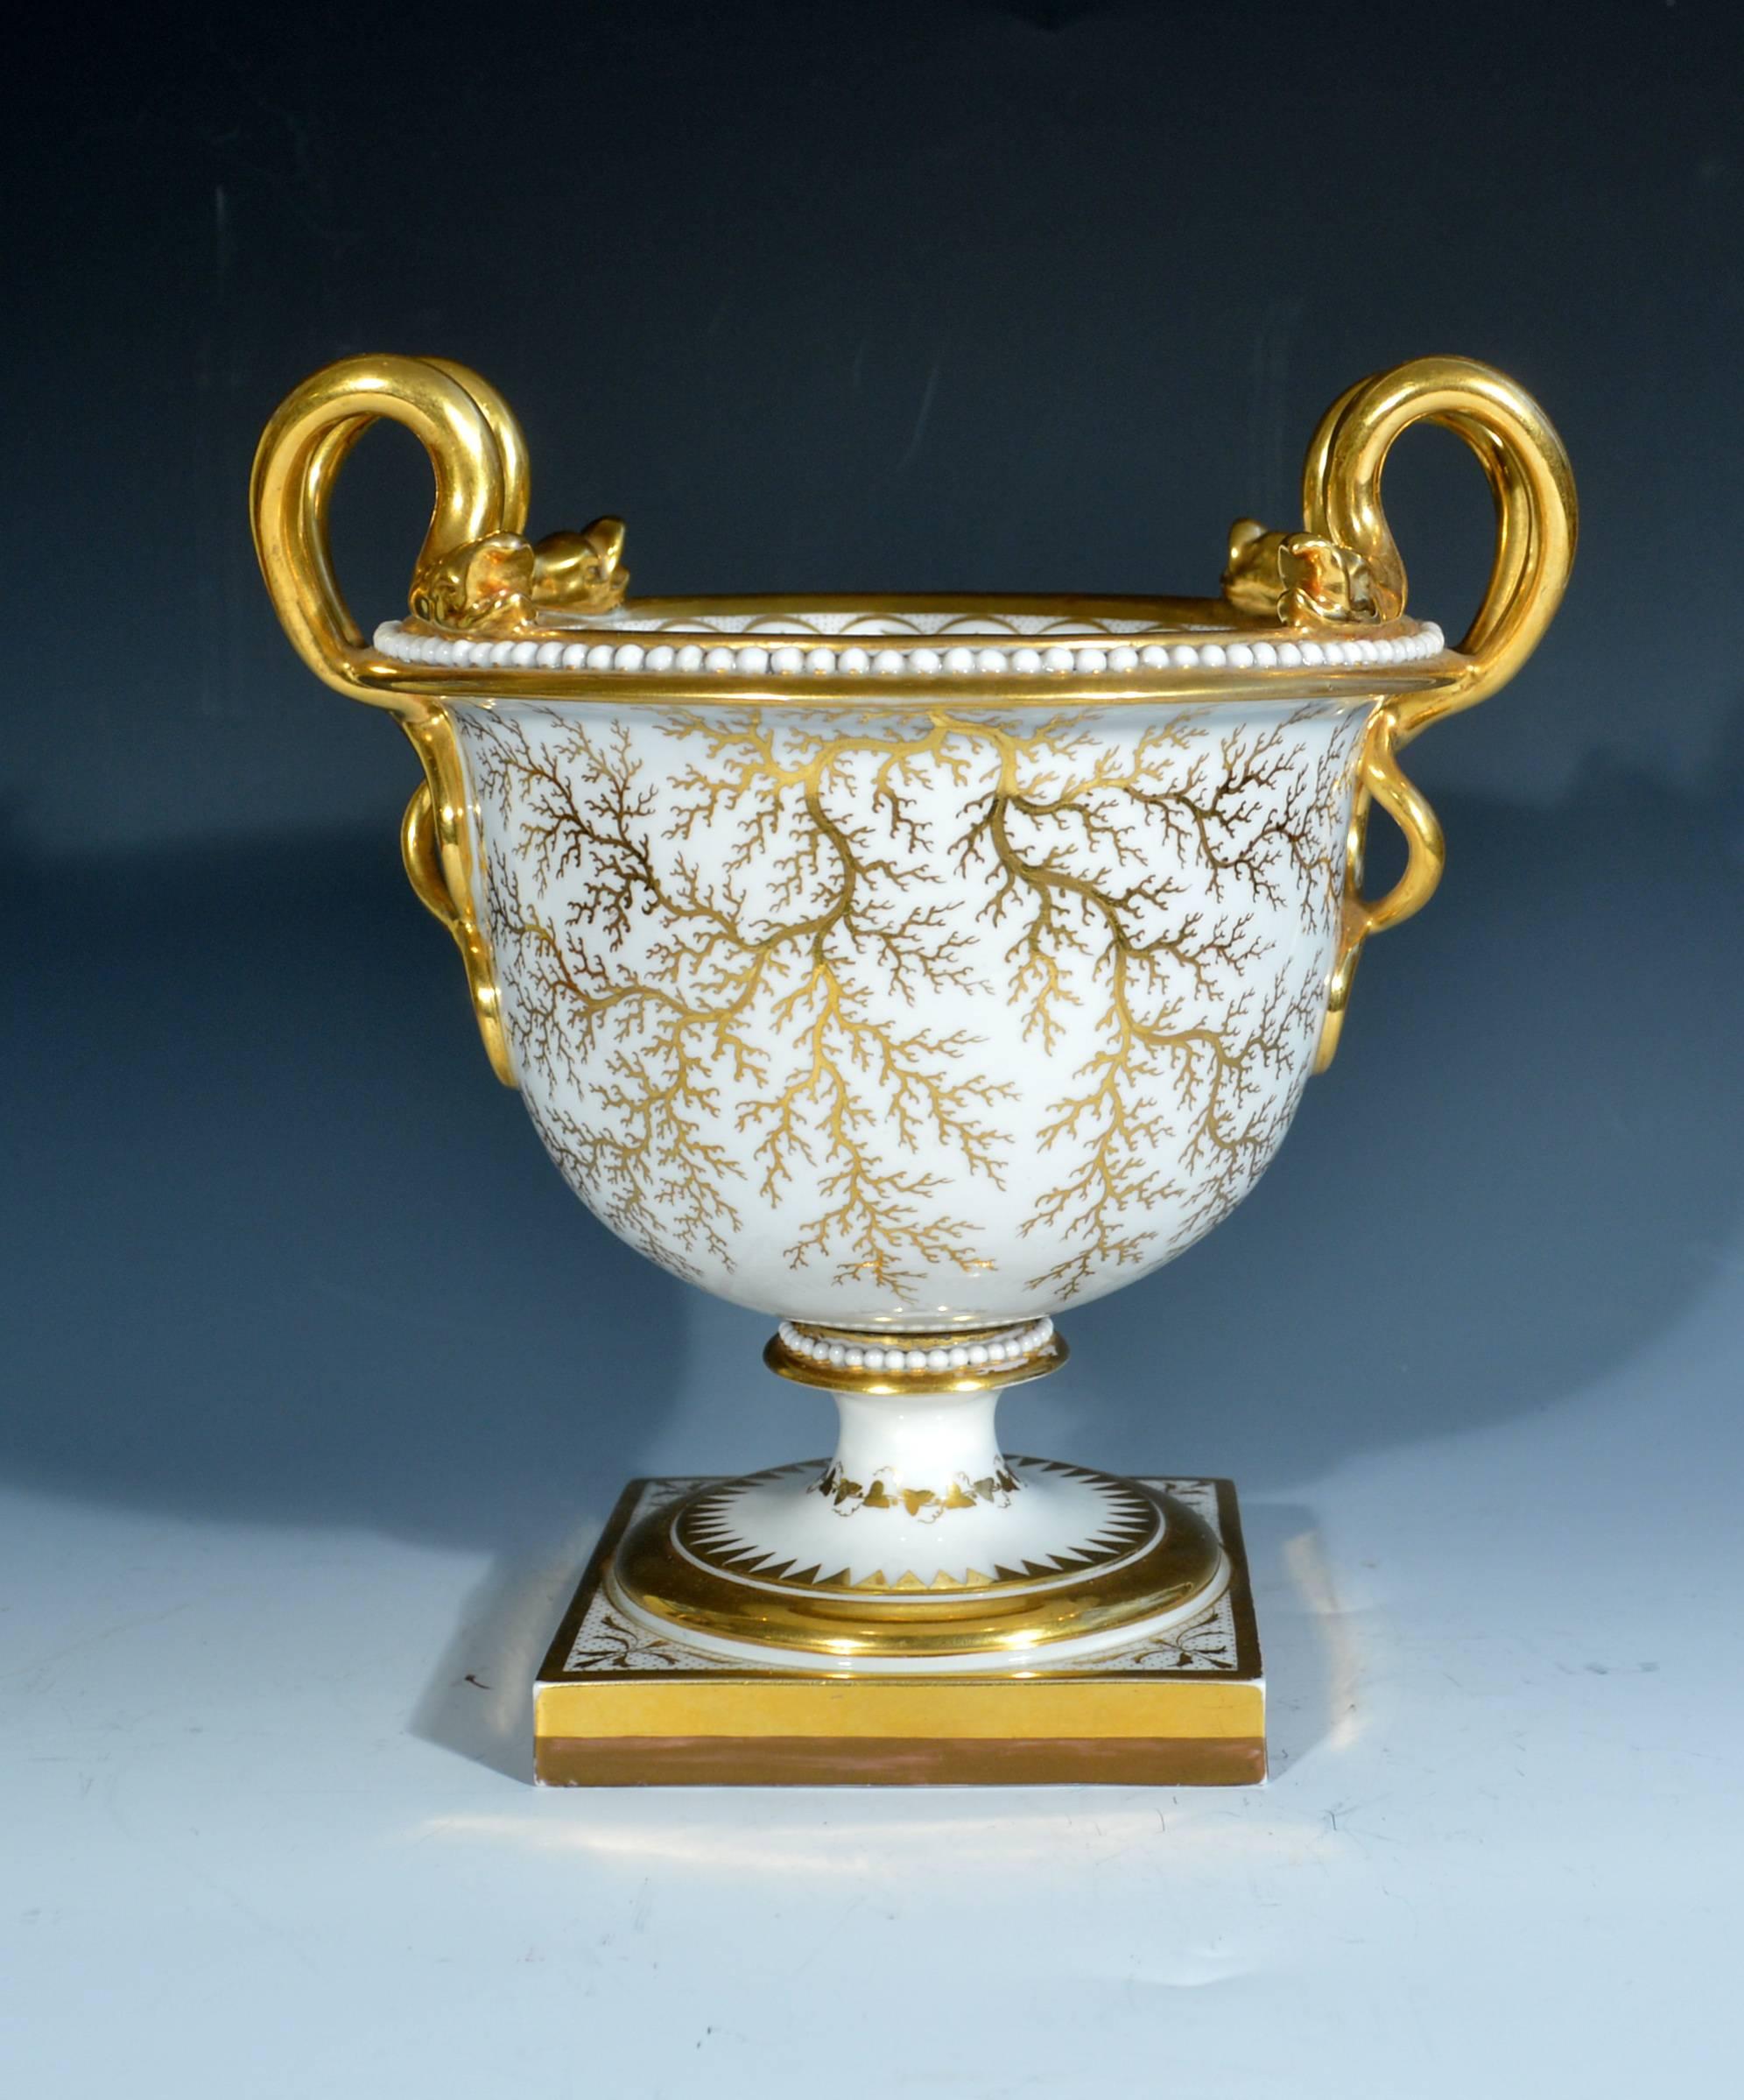 Flight, barr and barr porcelain urn, painted with Morpeth Castle, Northumberland.
circa 1815.

The flight, barr & barr porcelain urn has a vermilion ground with gilt intertwining snake handles, the urn raised on a square foot. The front of the